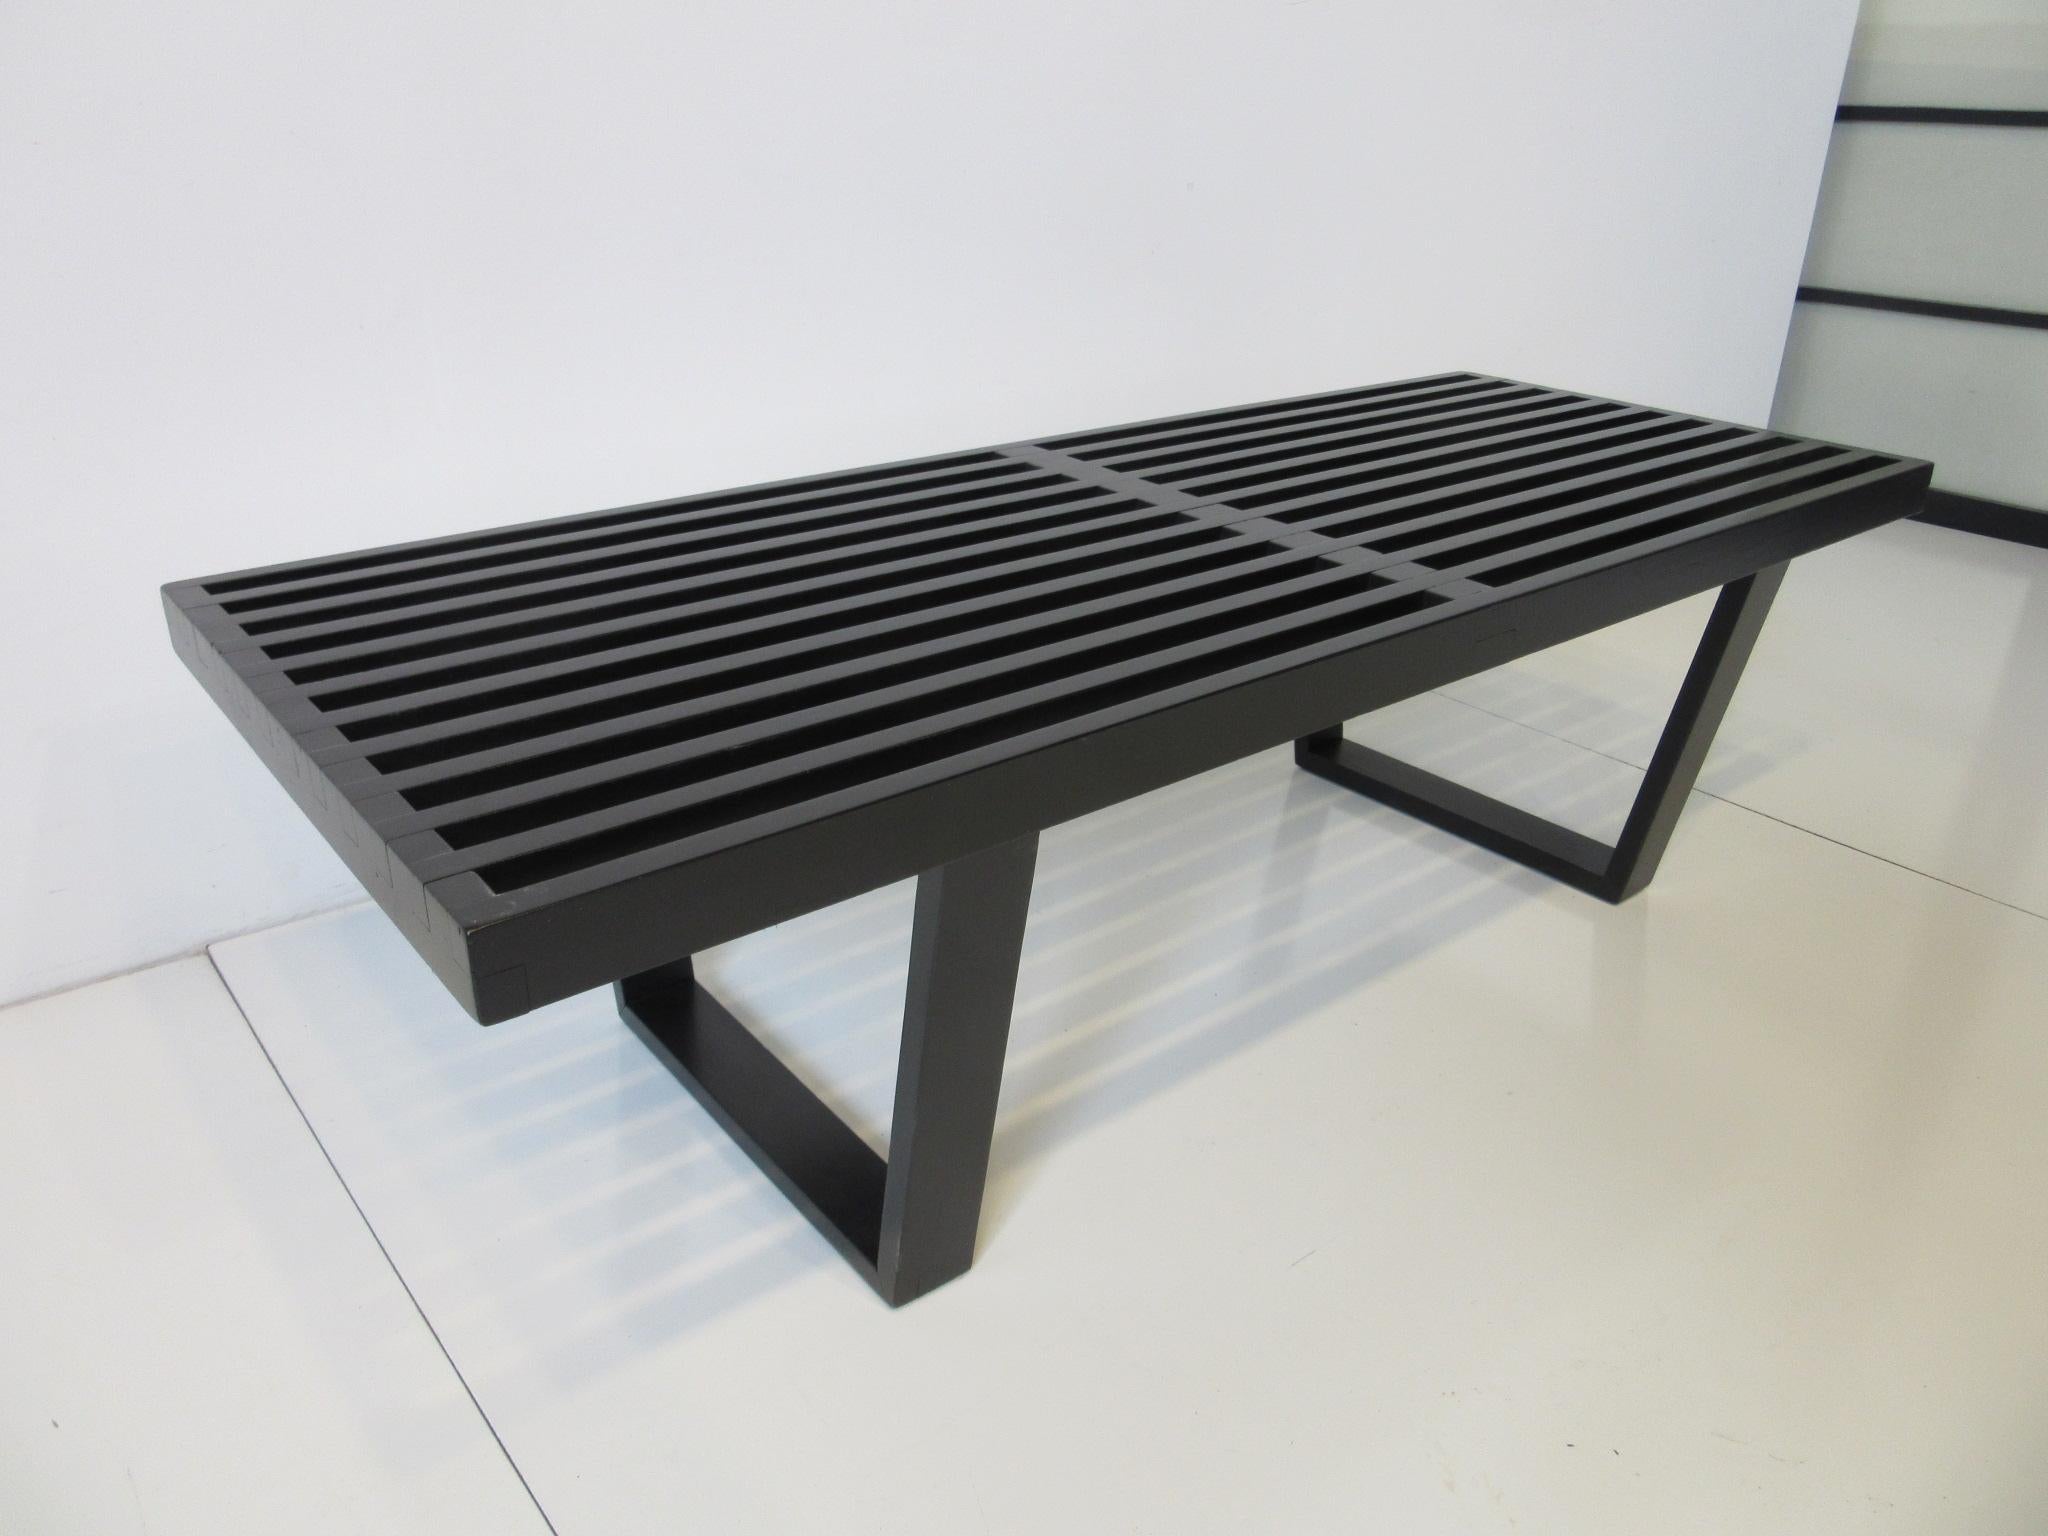 A vintage satin black slatted wood bench / coffee table designed by George Nelson this iconic piece is in the smaller size and perfect for that living room, entrance way or the foot of a bed . Manufactured by the Herman Miller furniture company.